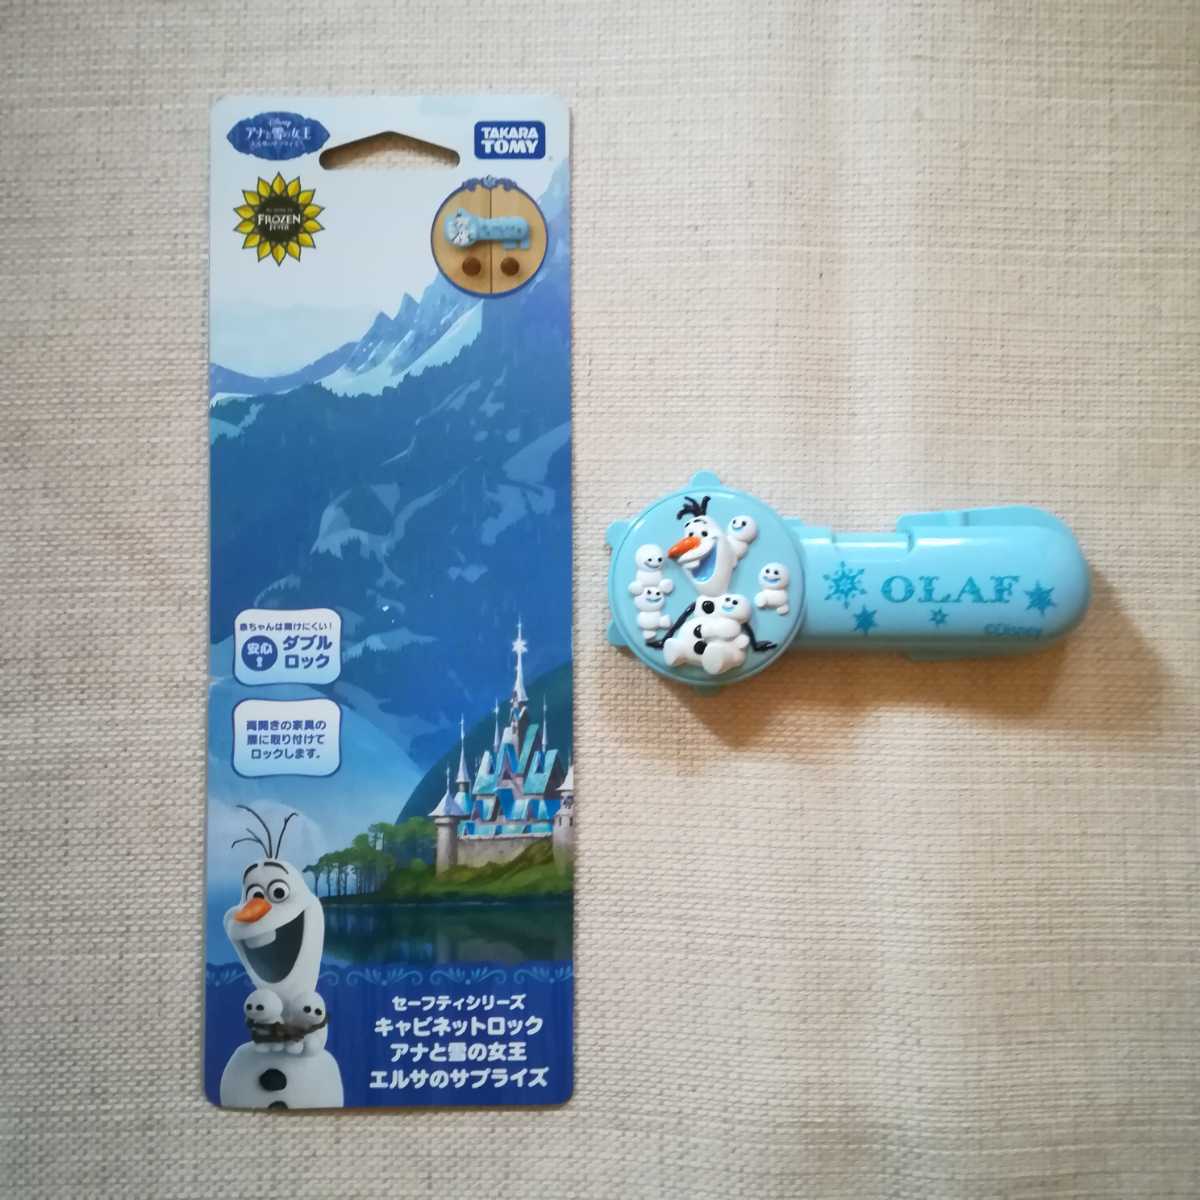  postage 140 jpy Takara Tommy safety series cabinet lock hole . snow. woman . hole snow Olaf child lock double lock 